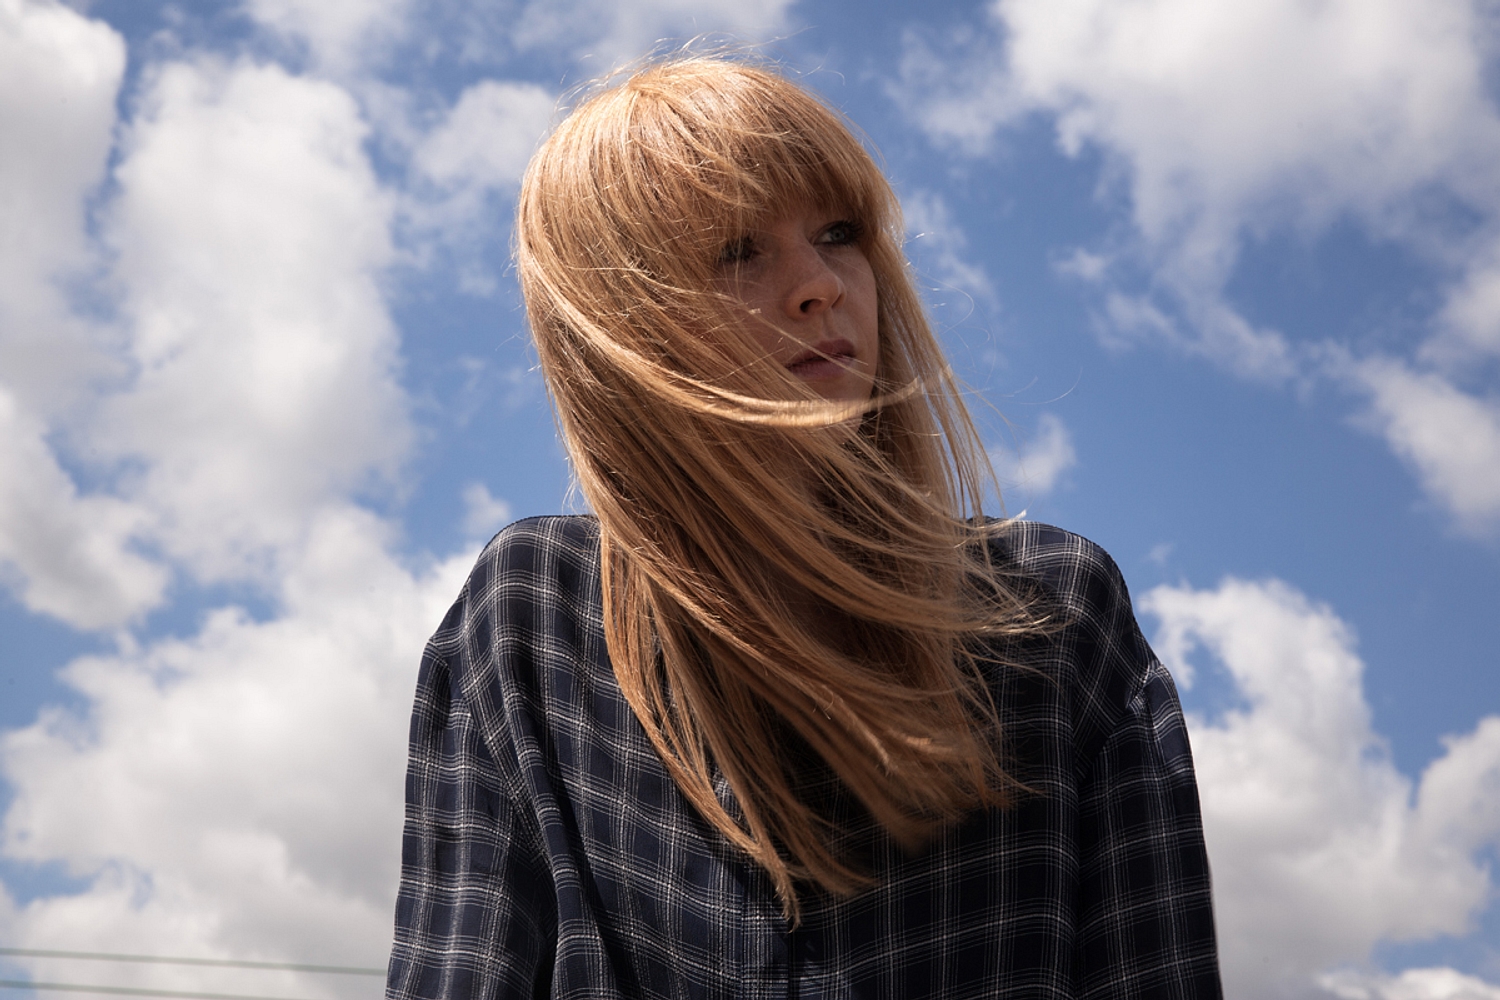 Lucy Rose shares ‘Shiver’ from ‘Live At Urchin Studios’